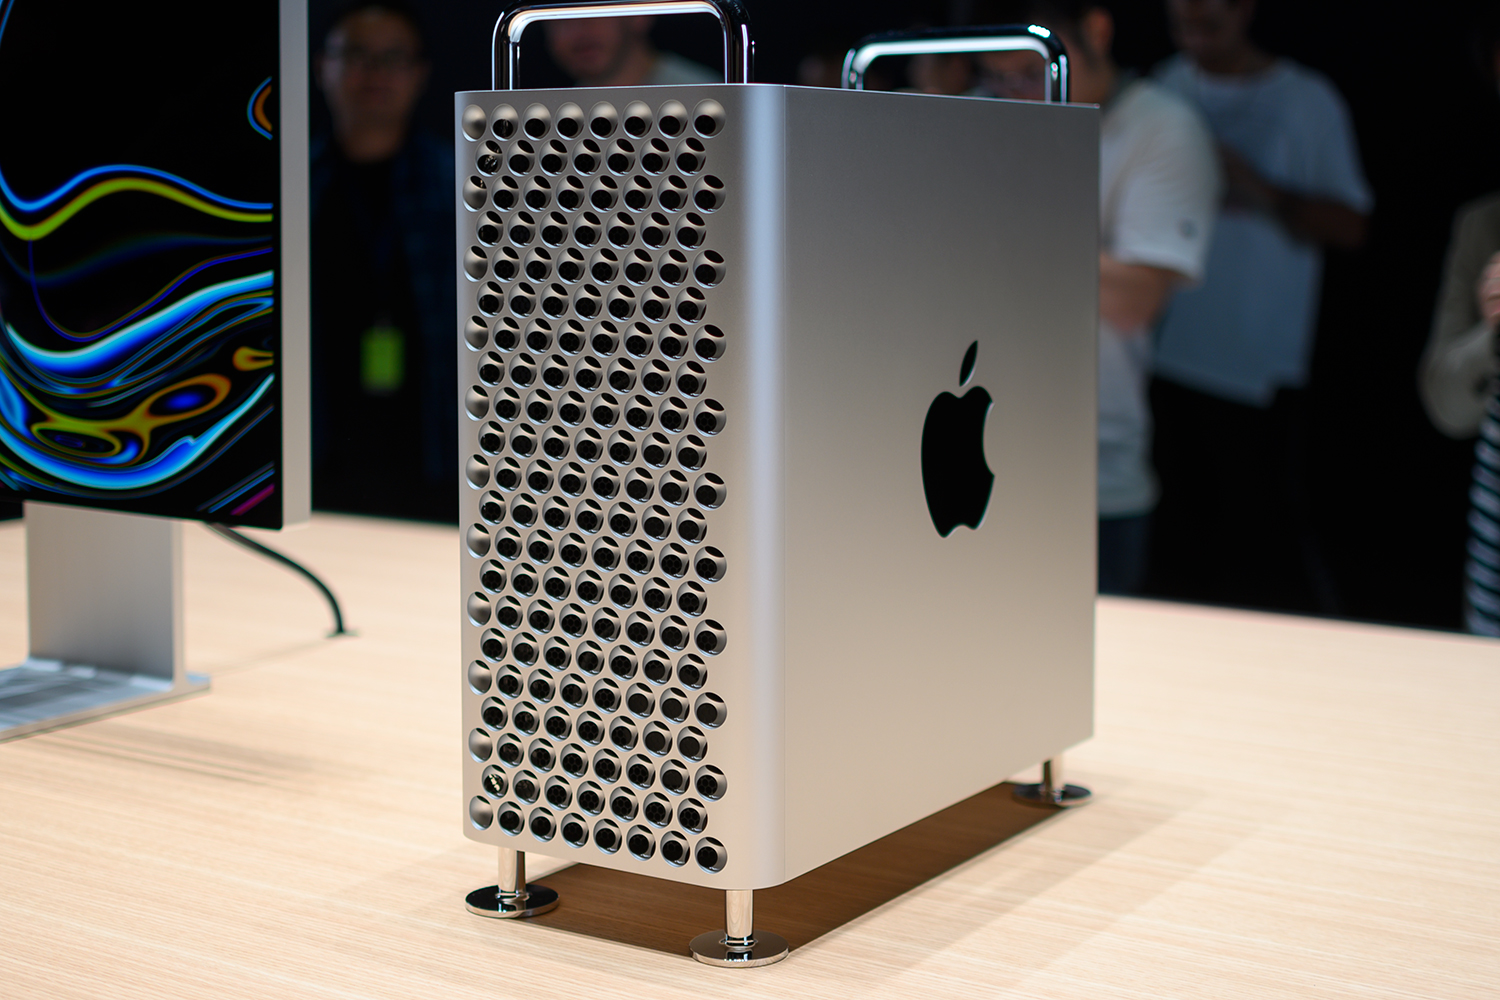 Our first-look photos of Apple's new Mac Pro and the Pro Display XDR